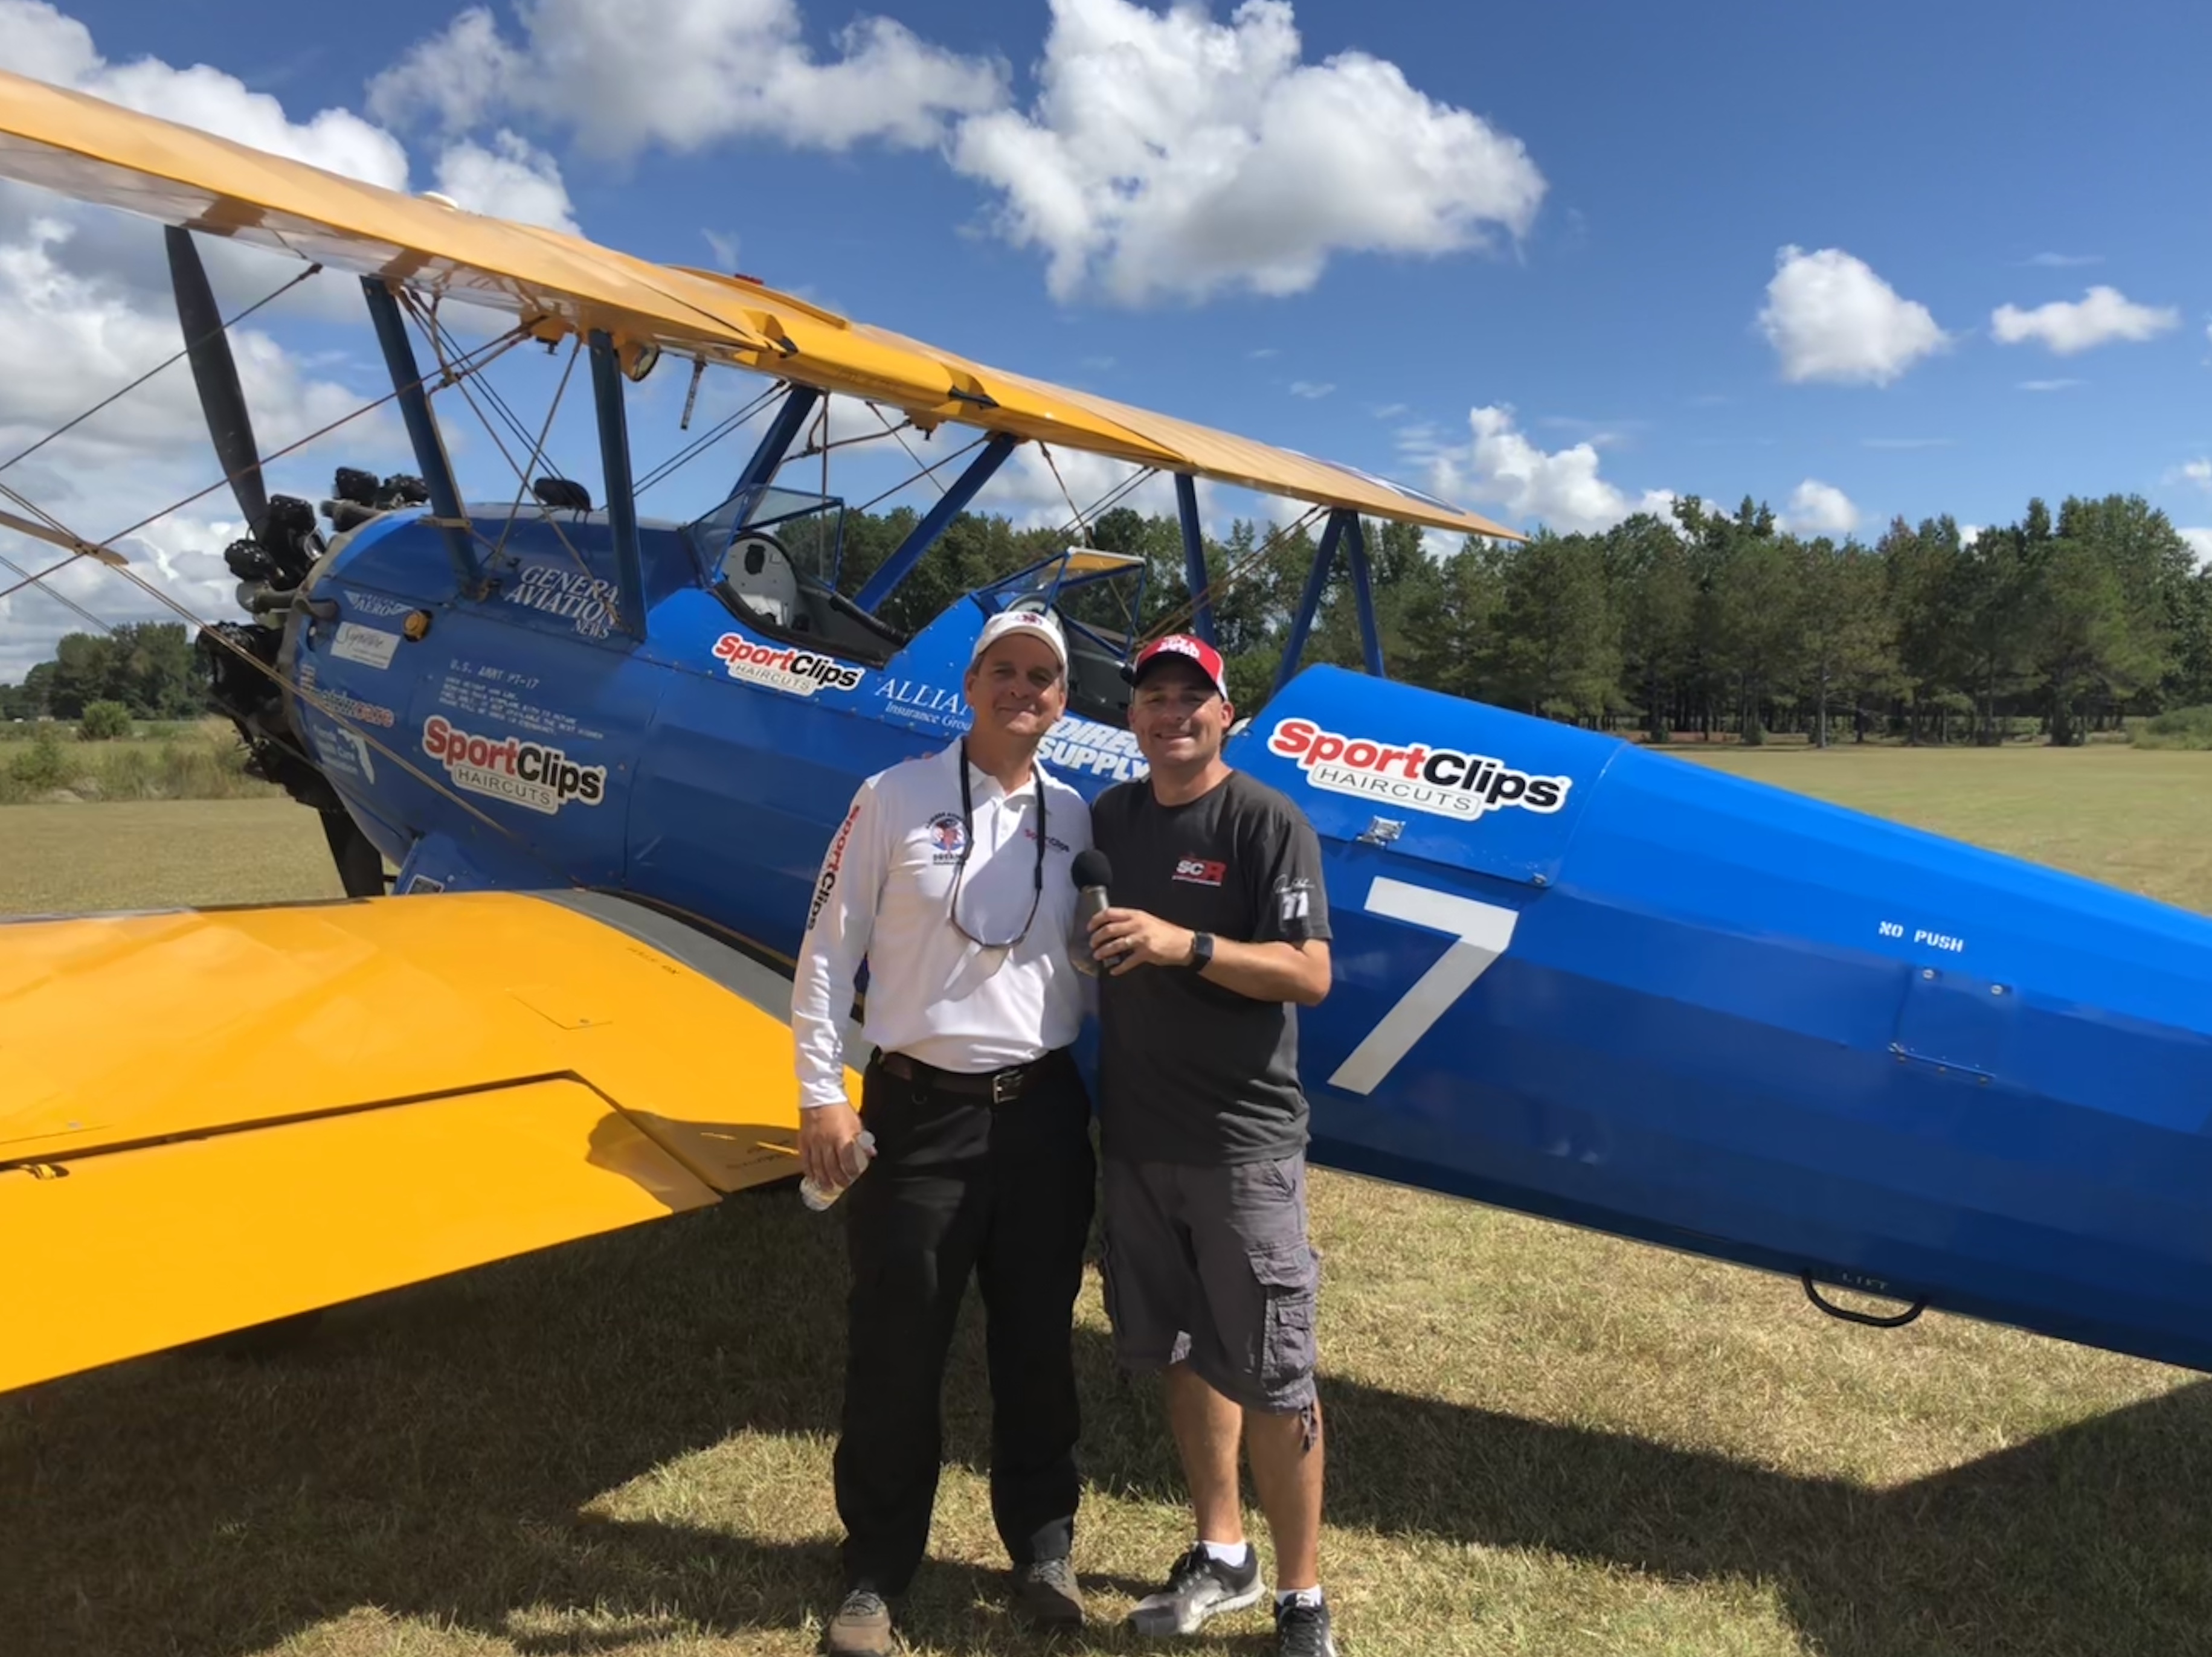 Tim Newton and Chad Jordan in front of plane